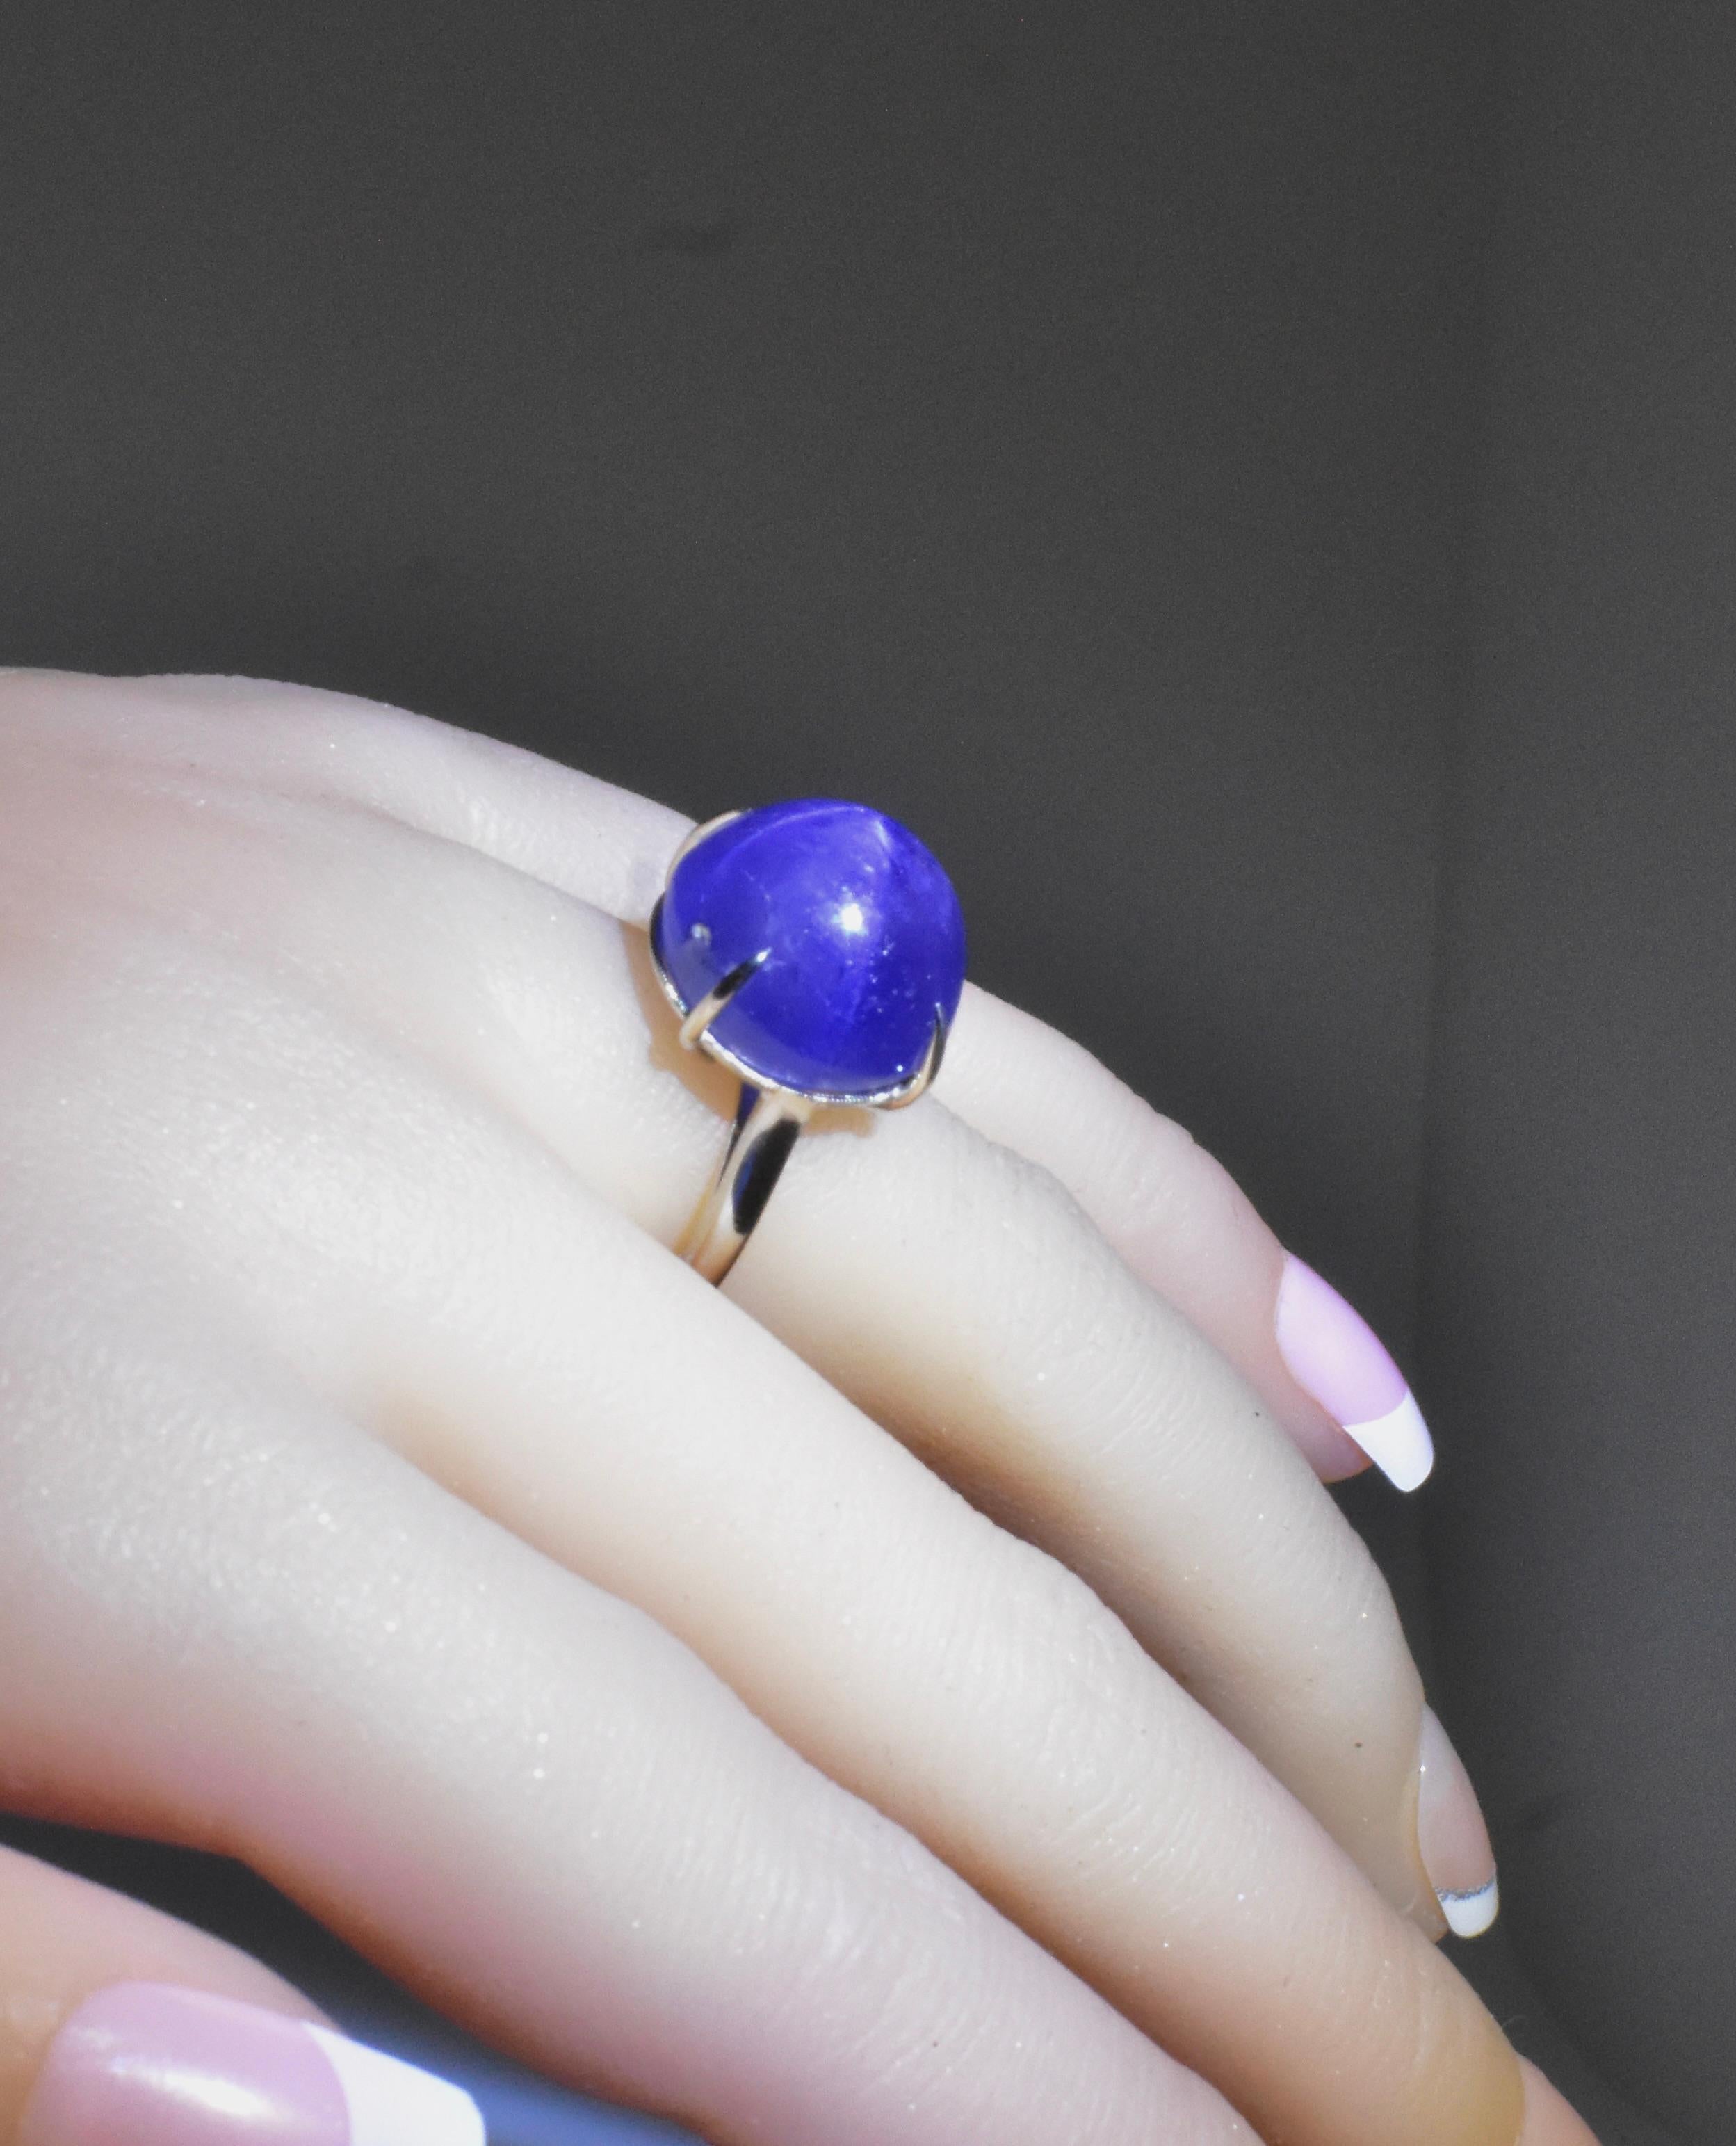 Cabochon Blue Star Unheated Sapphire, 32 cts., Platinum New Ring by Pierre/Famille. For Sale